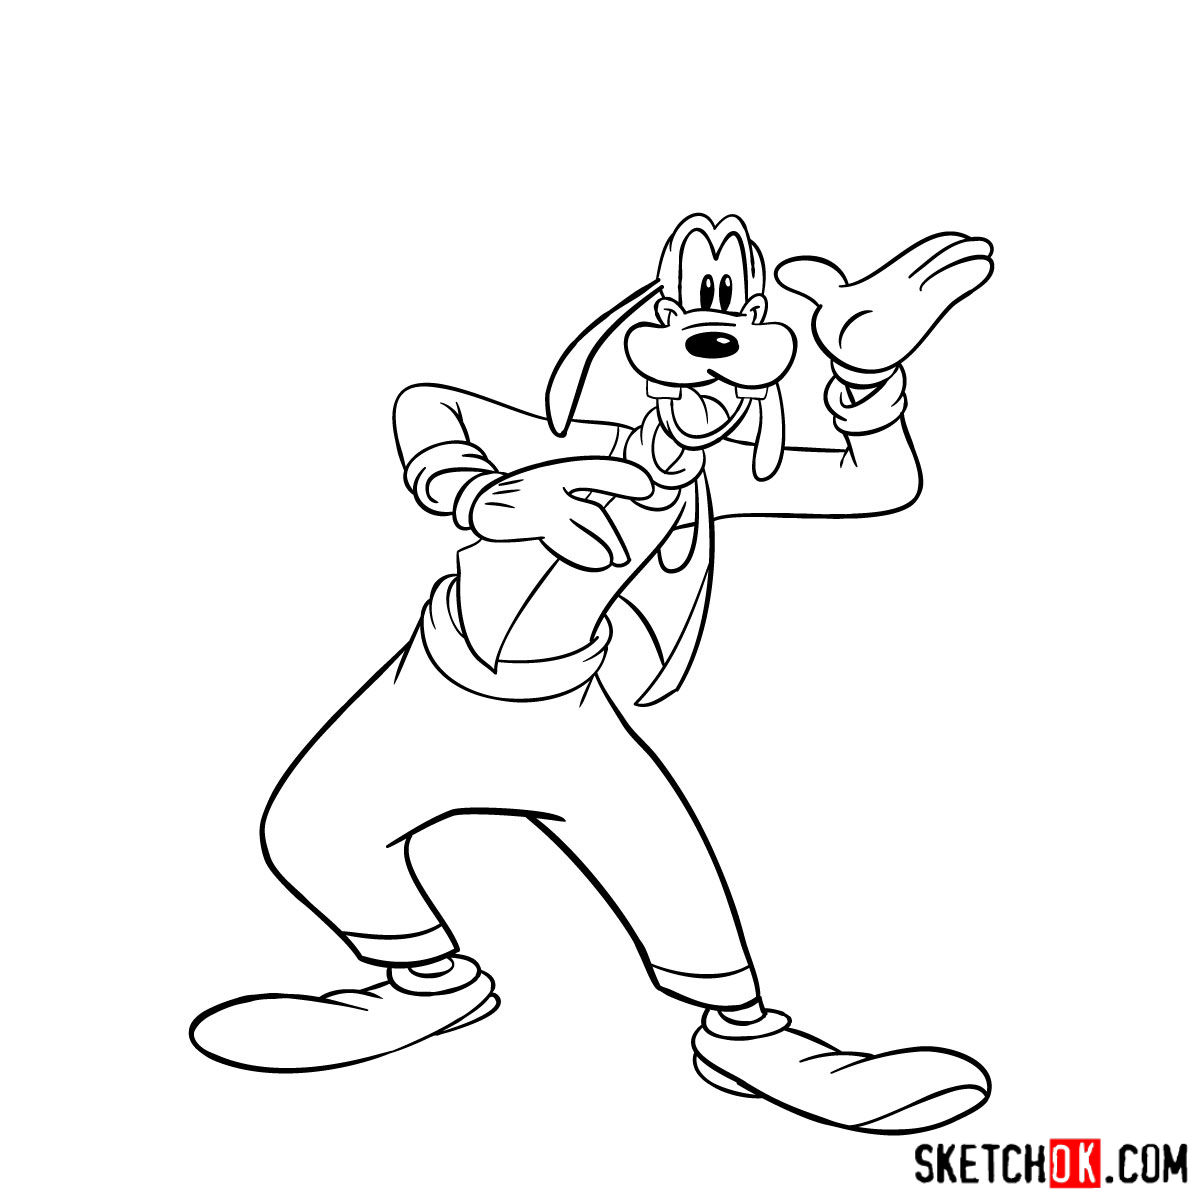 How to draw Goofy - step 13